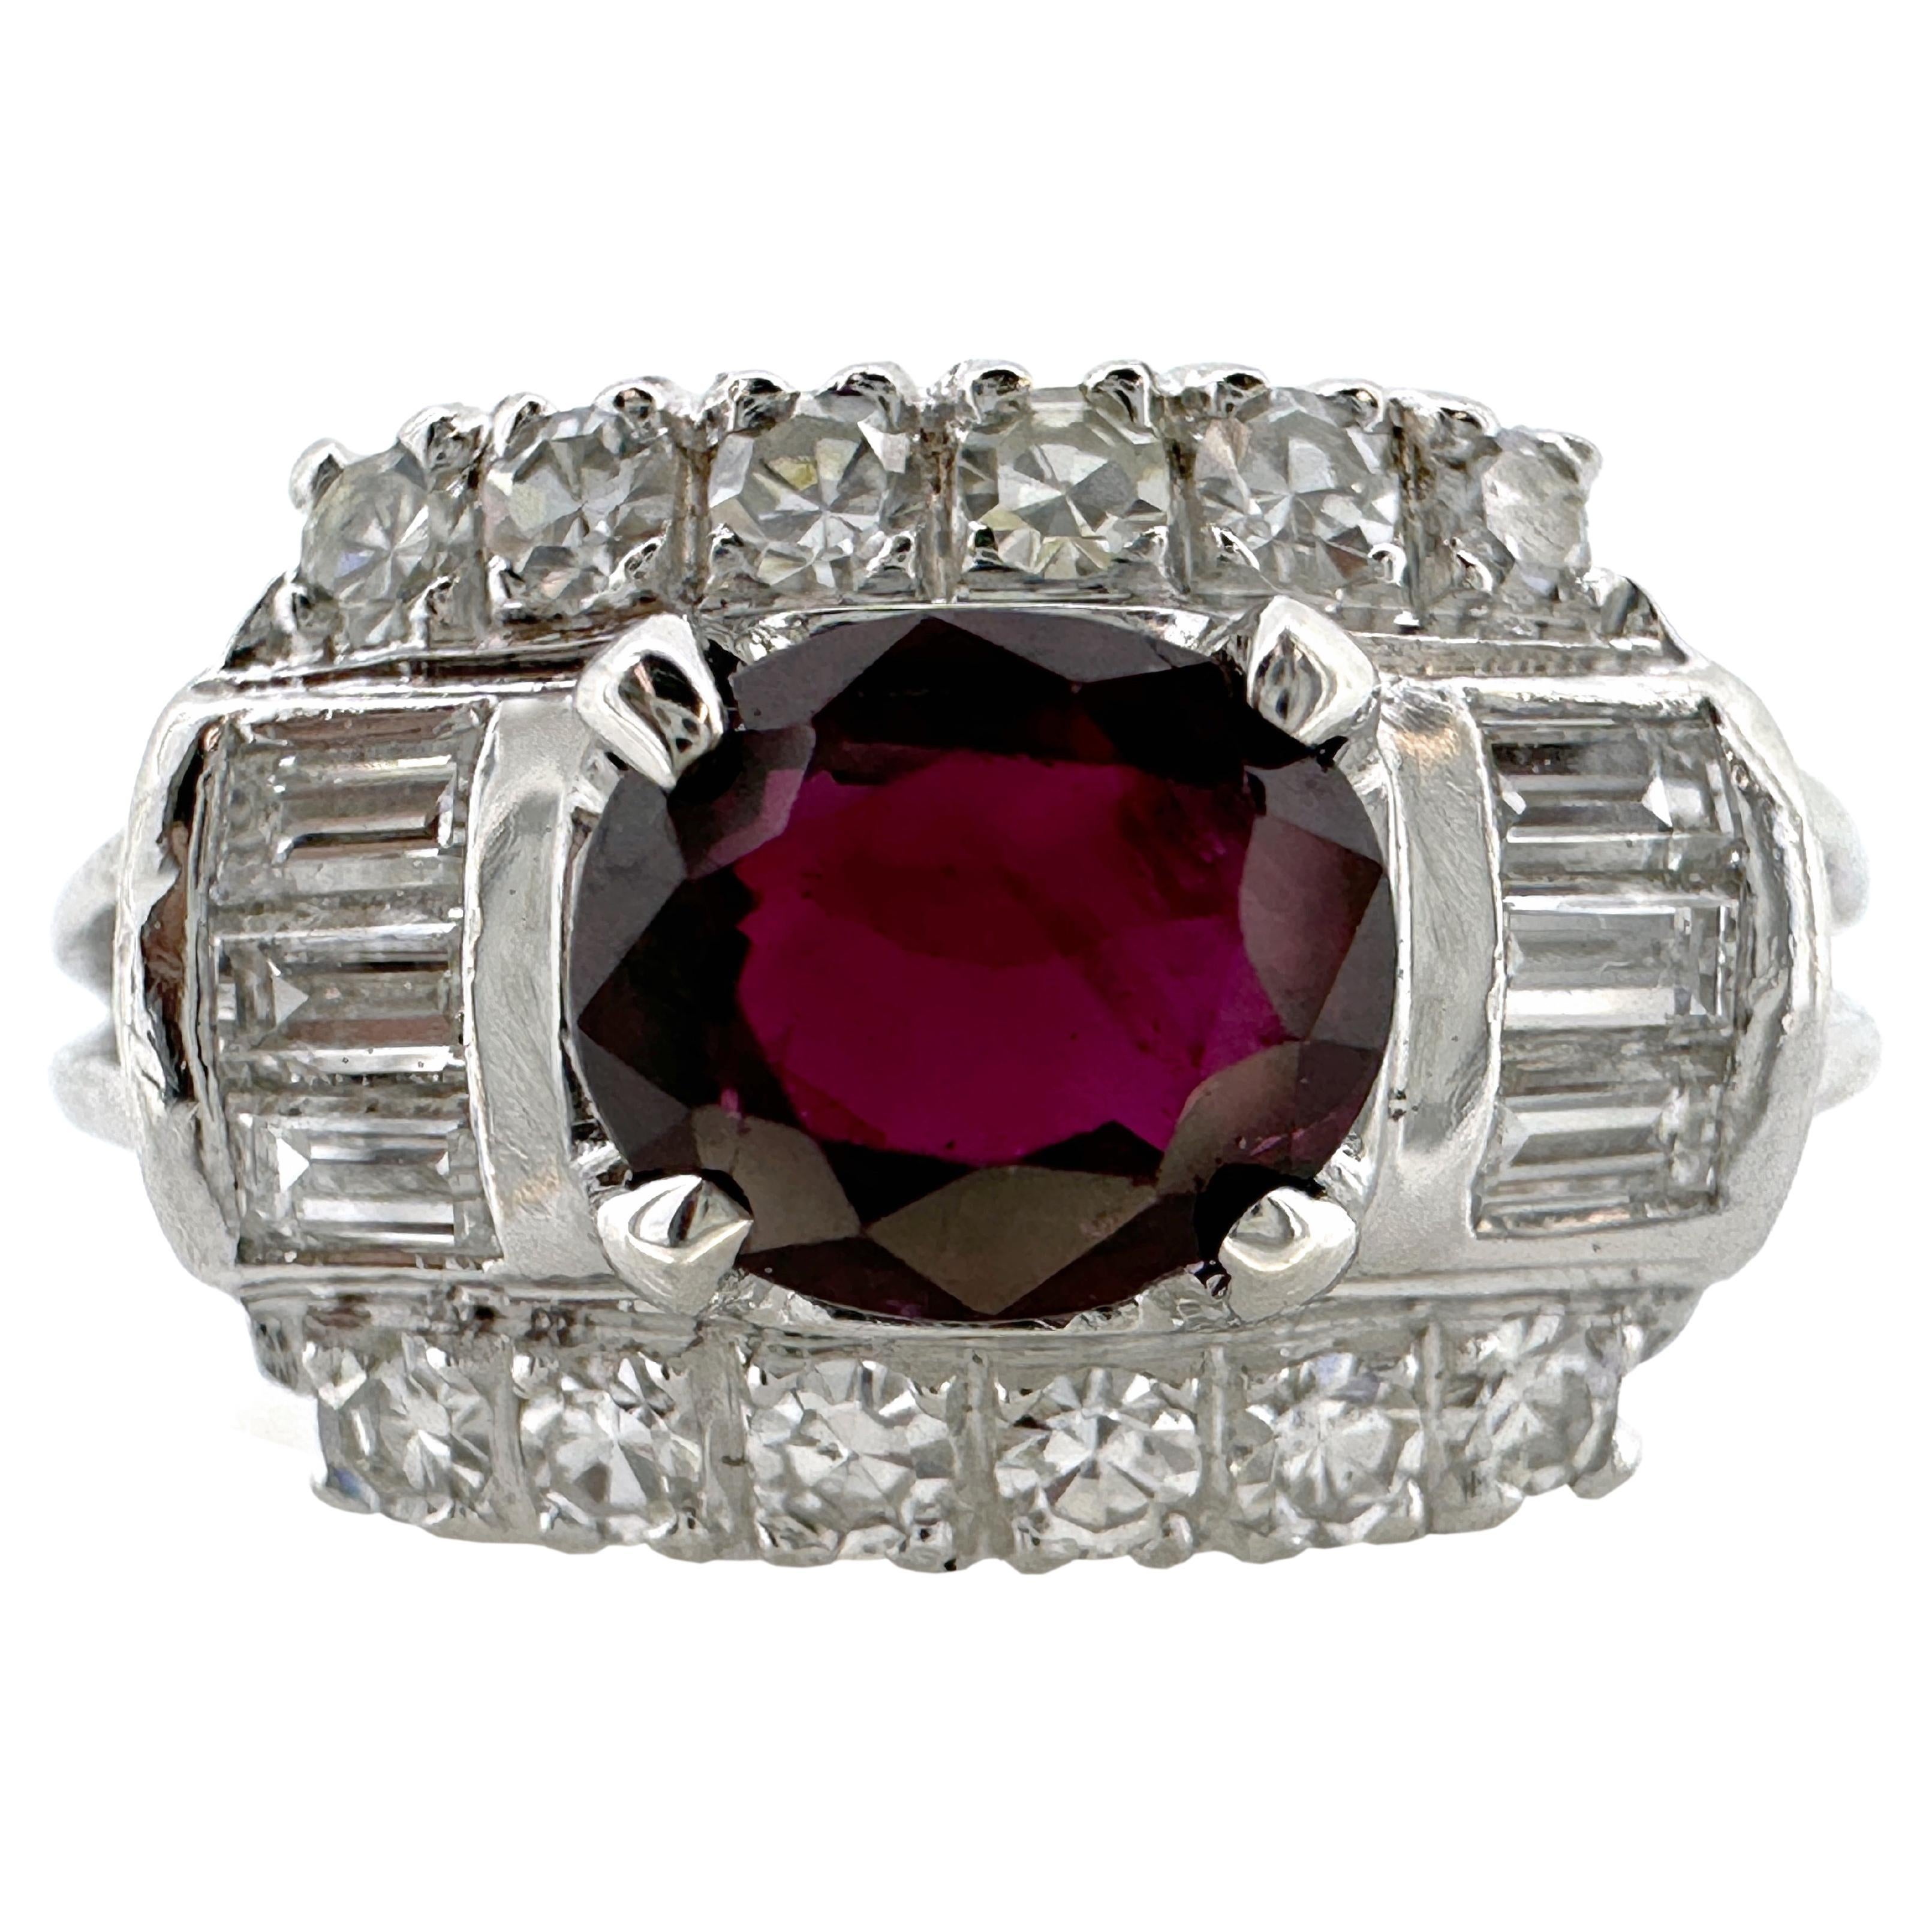 GIA-Certified 1.06 Carat Ruby in Deco-Era Platinum Ring with 0.7 Carats Diamonds For Sale